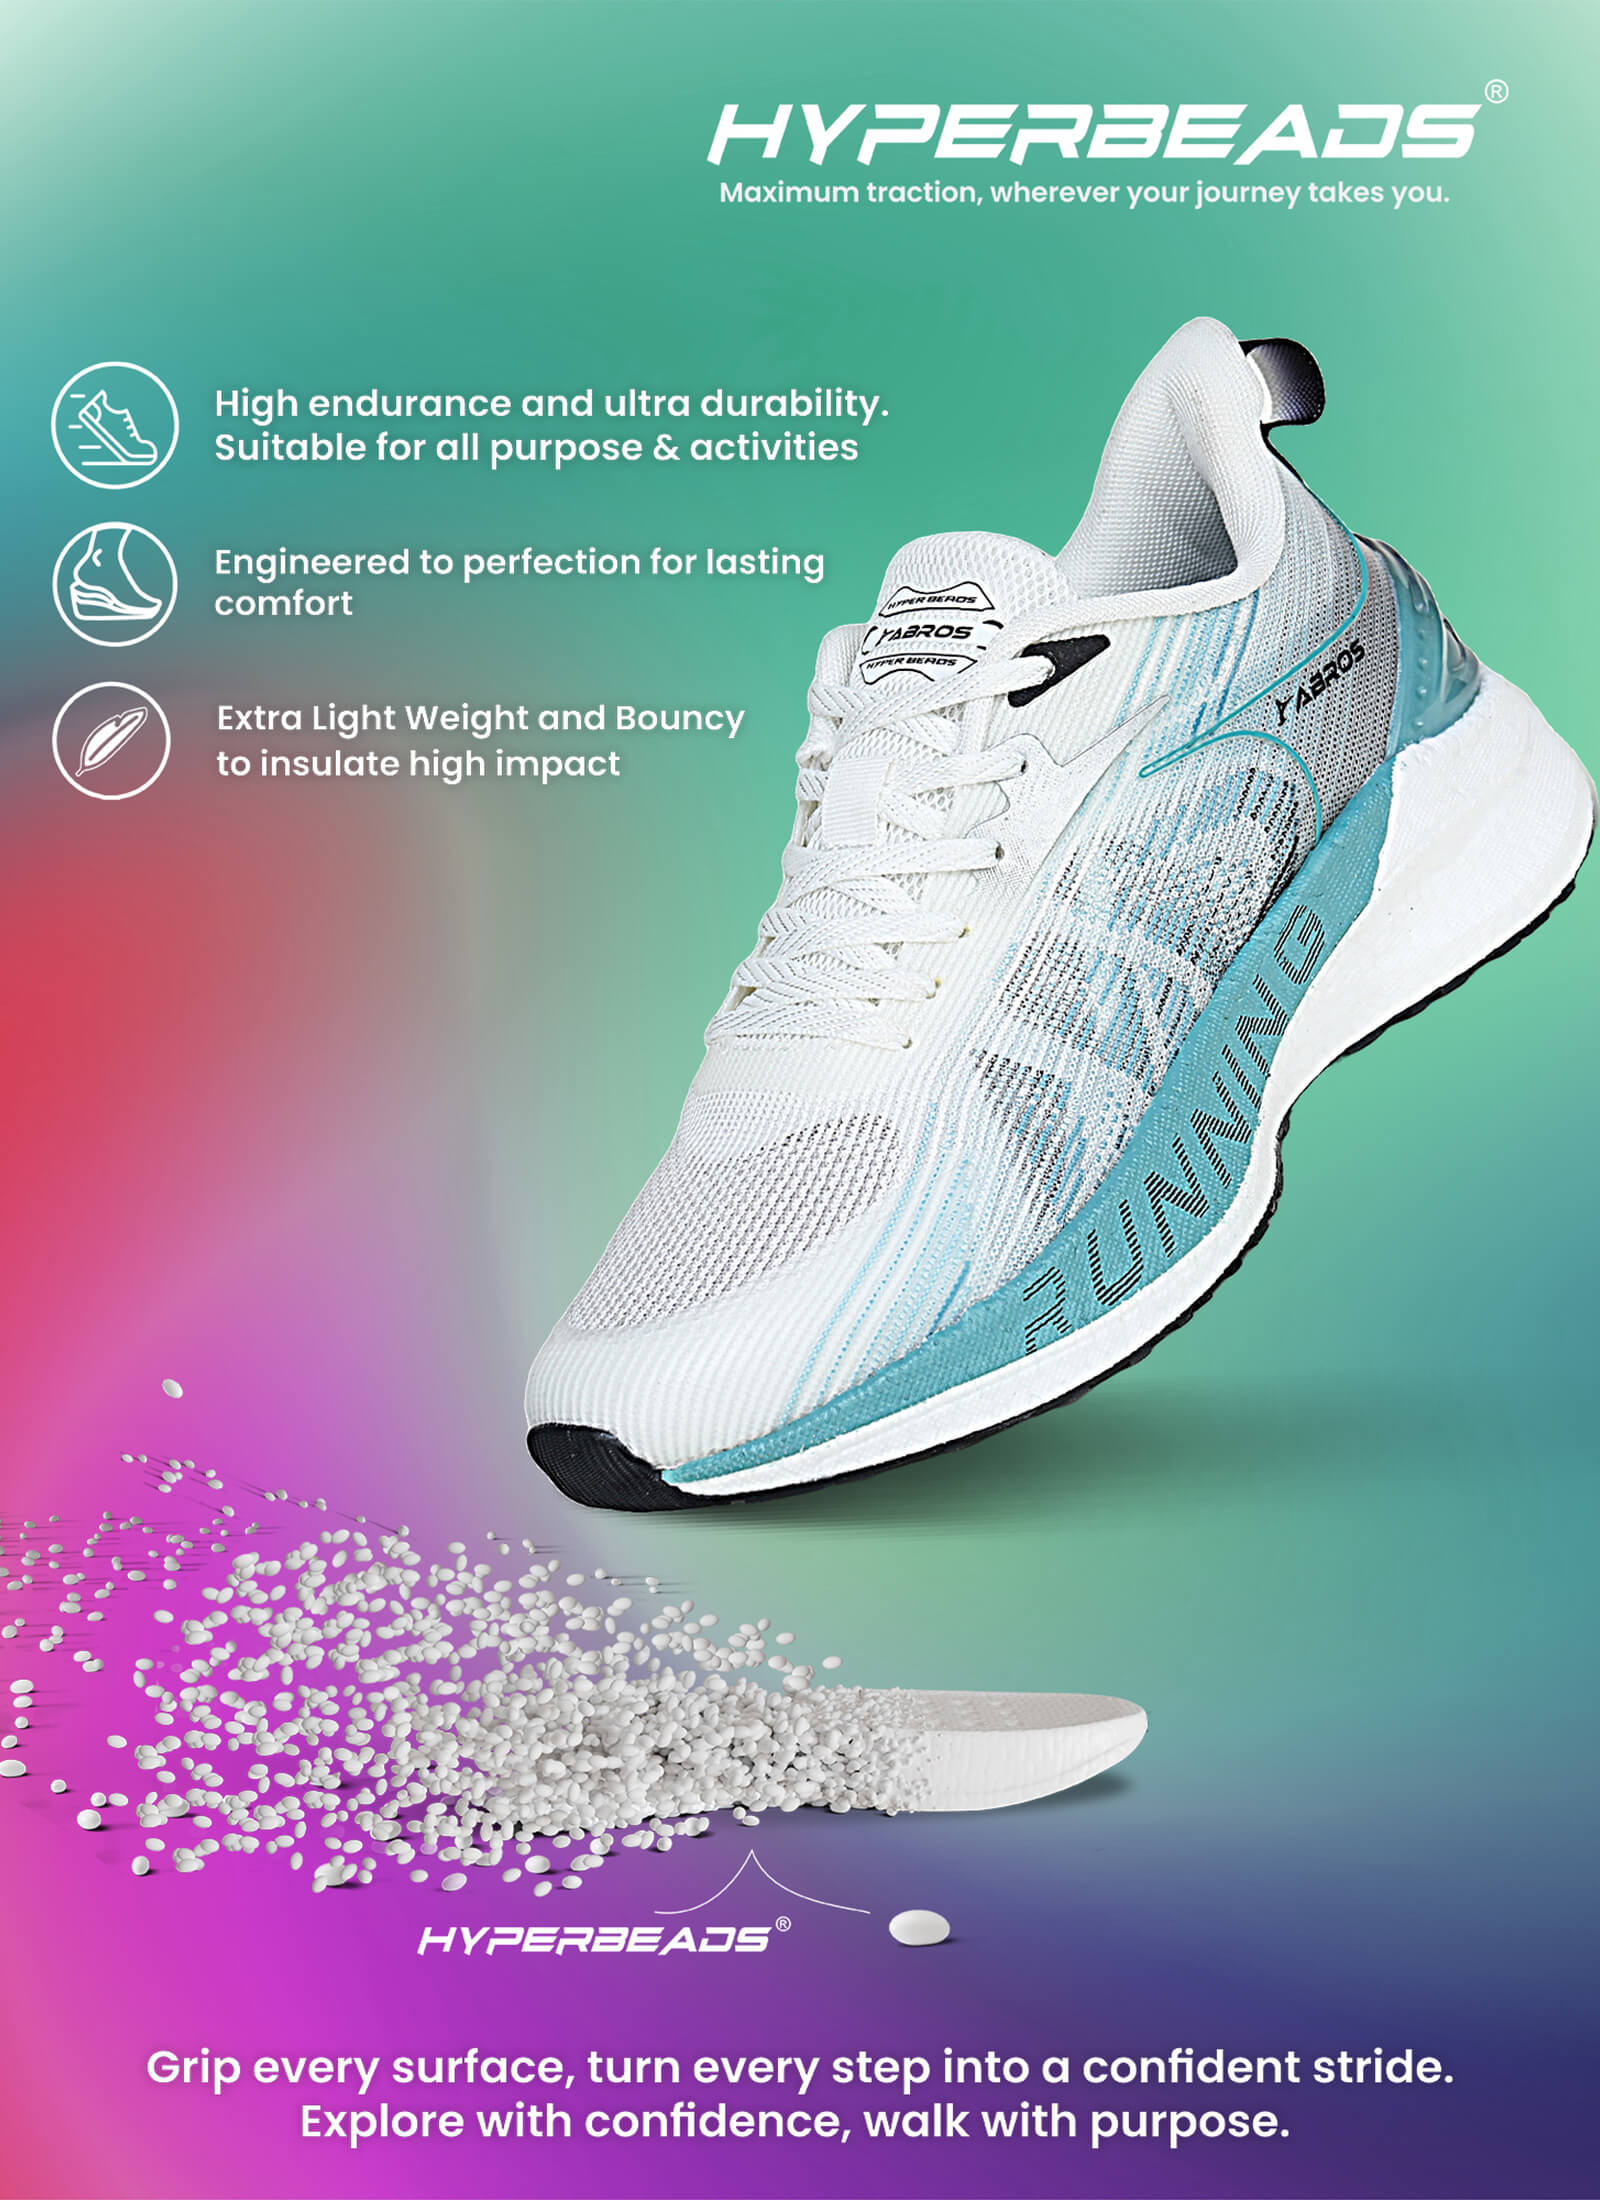 Daily Hyper Beads Sports Shoes for Men